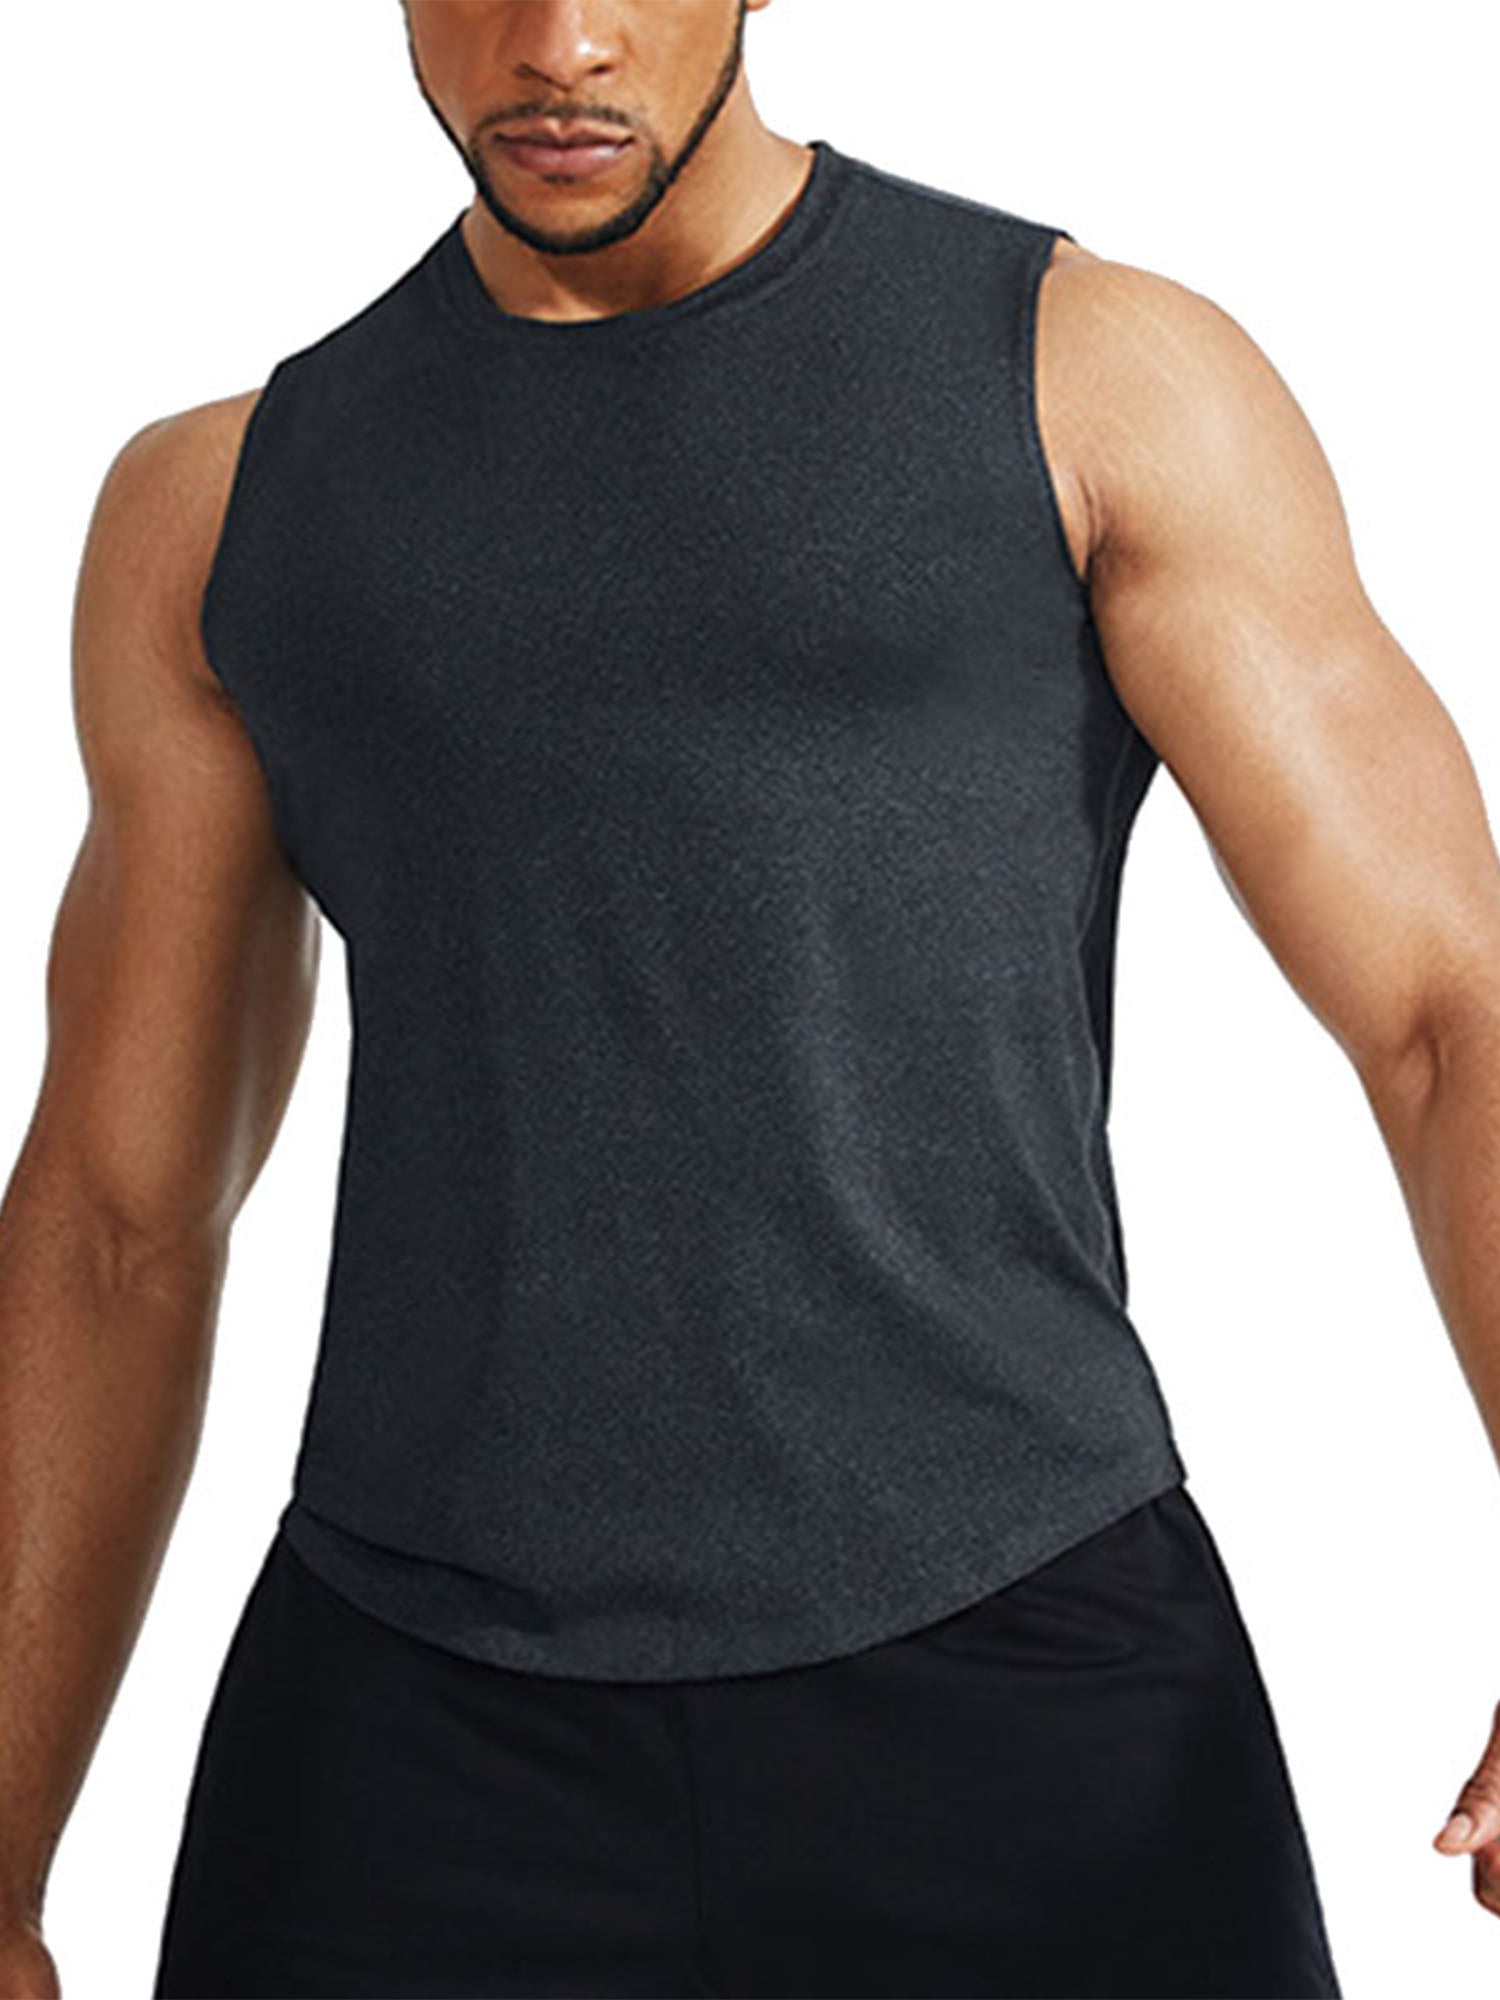 Mens Athletic Tank Top Quick-Dry Running Shirt Workout Muscle Tee Racerback ComfortSoft Tanks Training Fitness T Shirts 